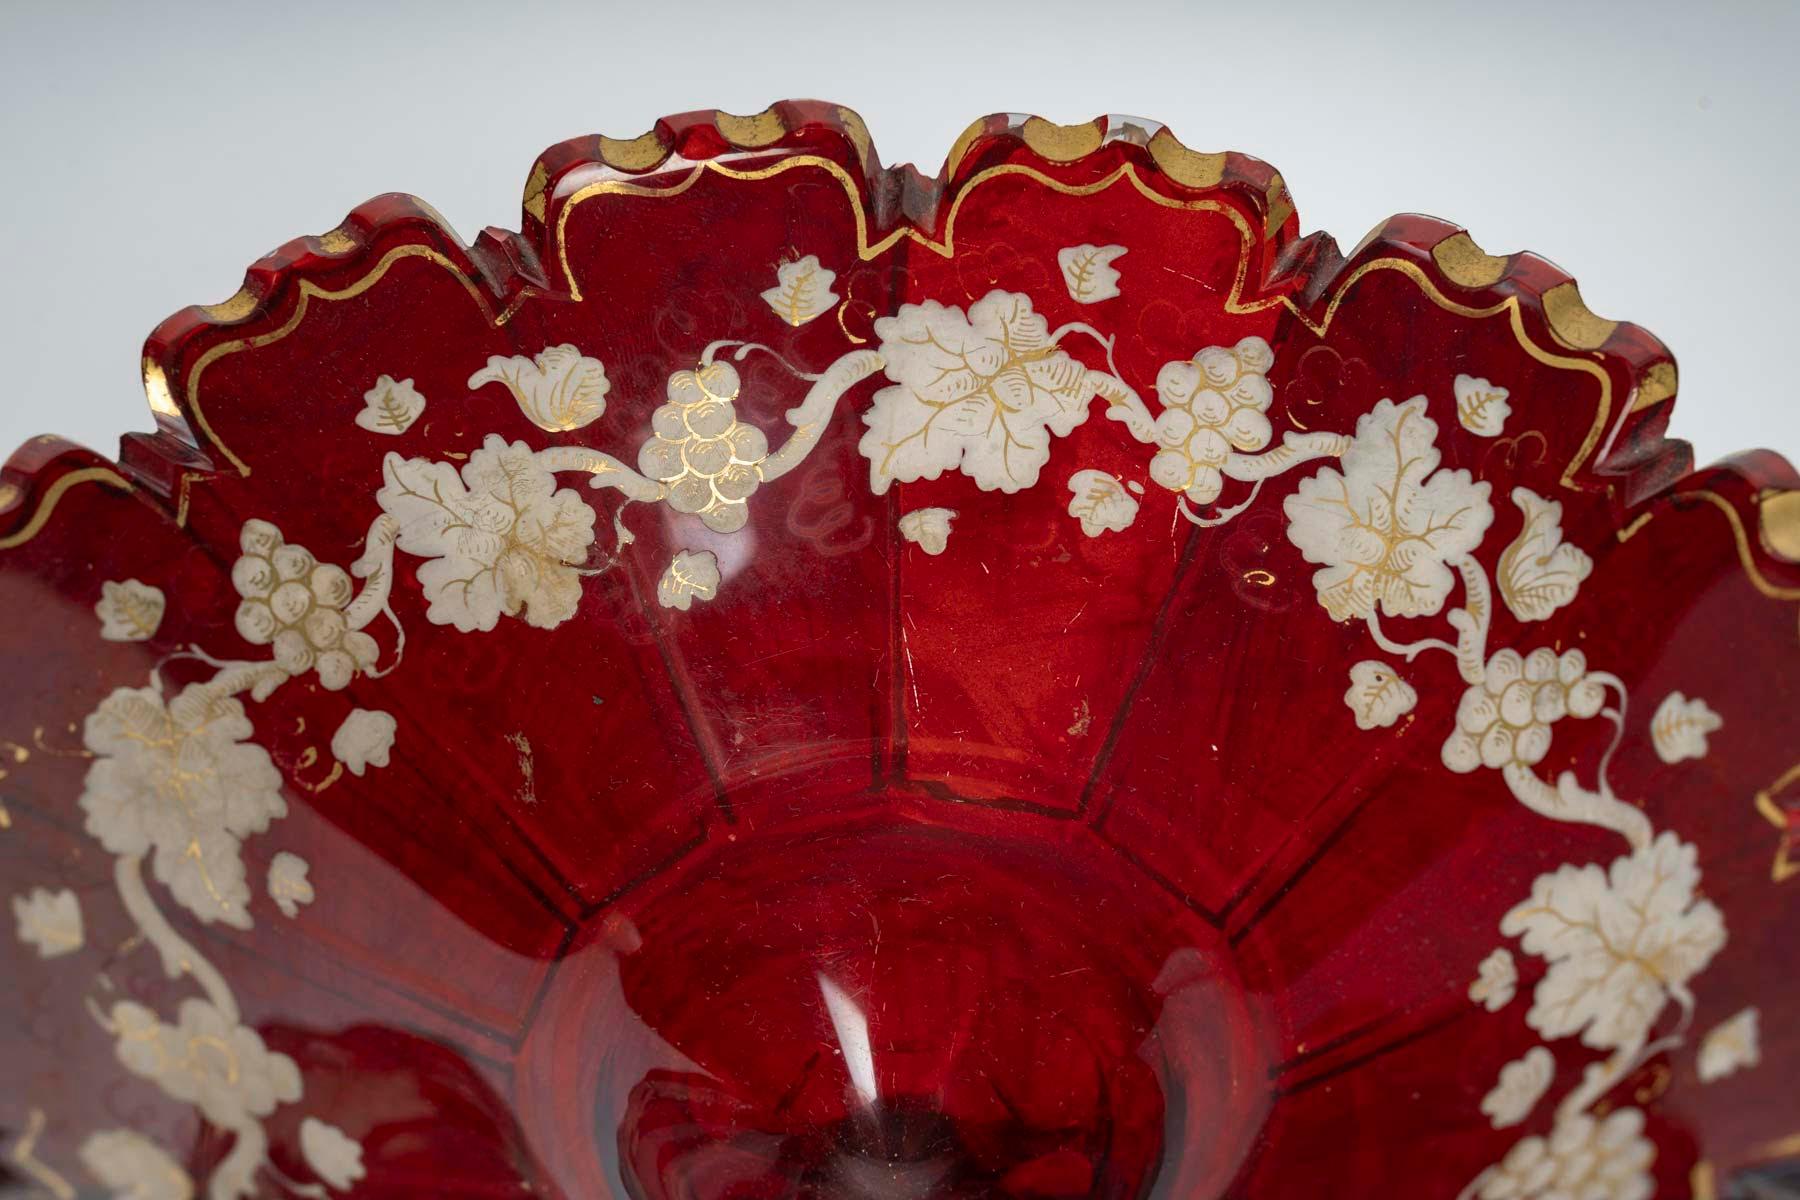 Bohemian red enamelled crystal bowl, 19th century, Napoleon III period.

A red Bohemian crystal bowl enamelled with white vine bunches, 19th century, Napoleon III period.
H: 13,5cm D: 17cm